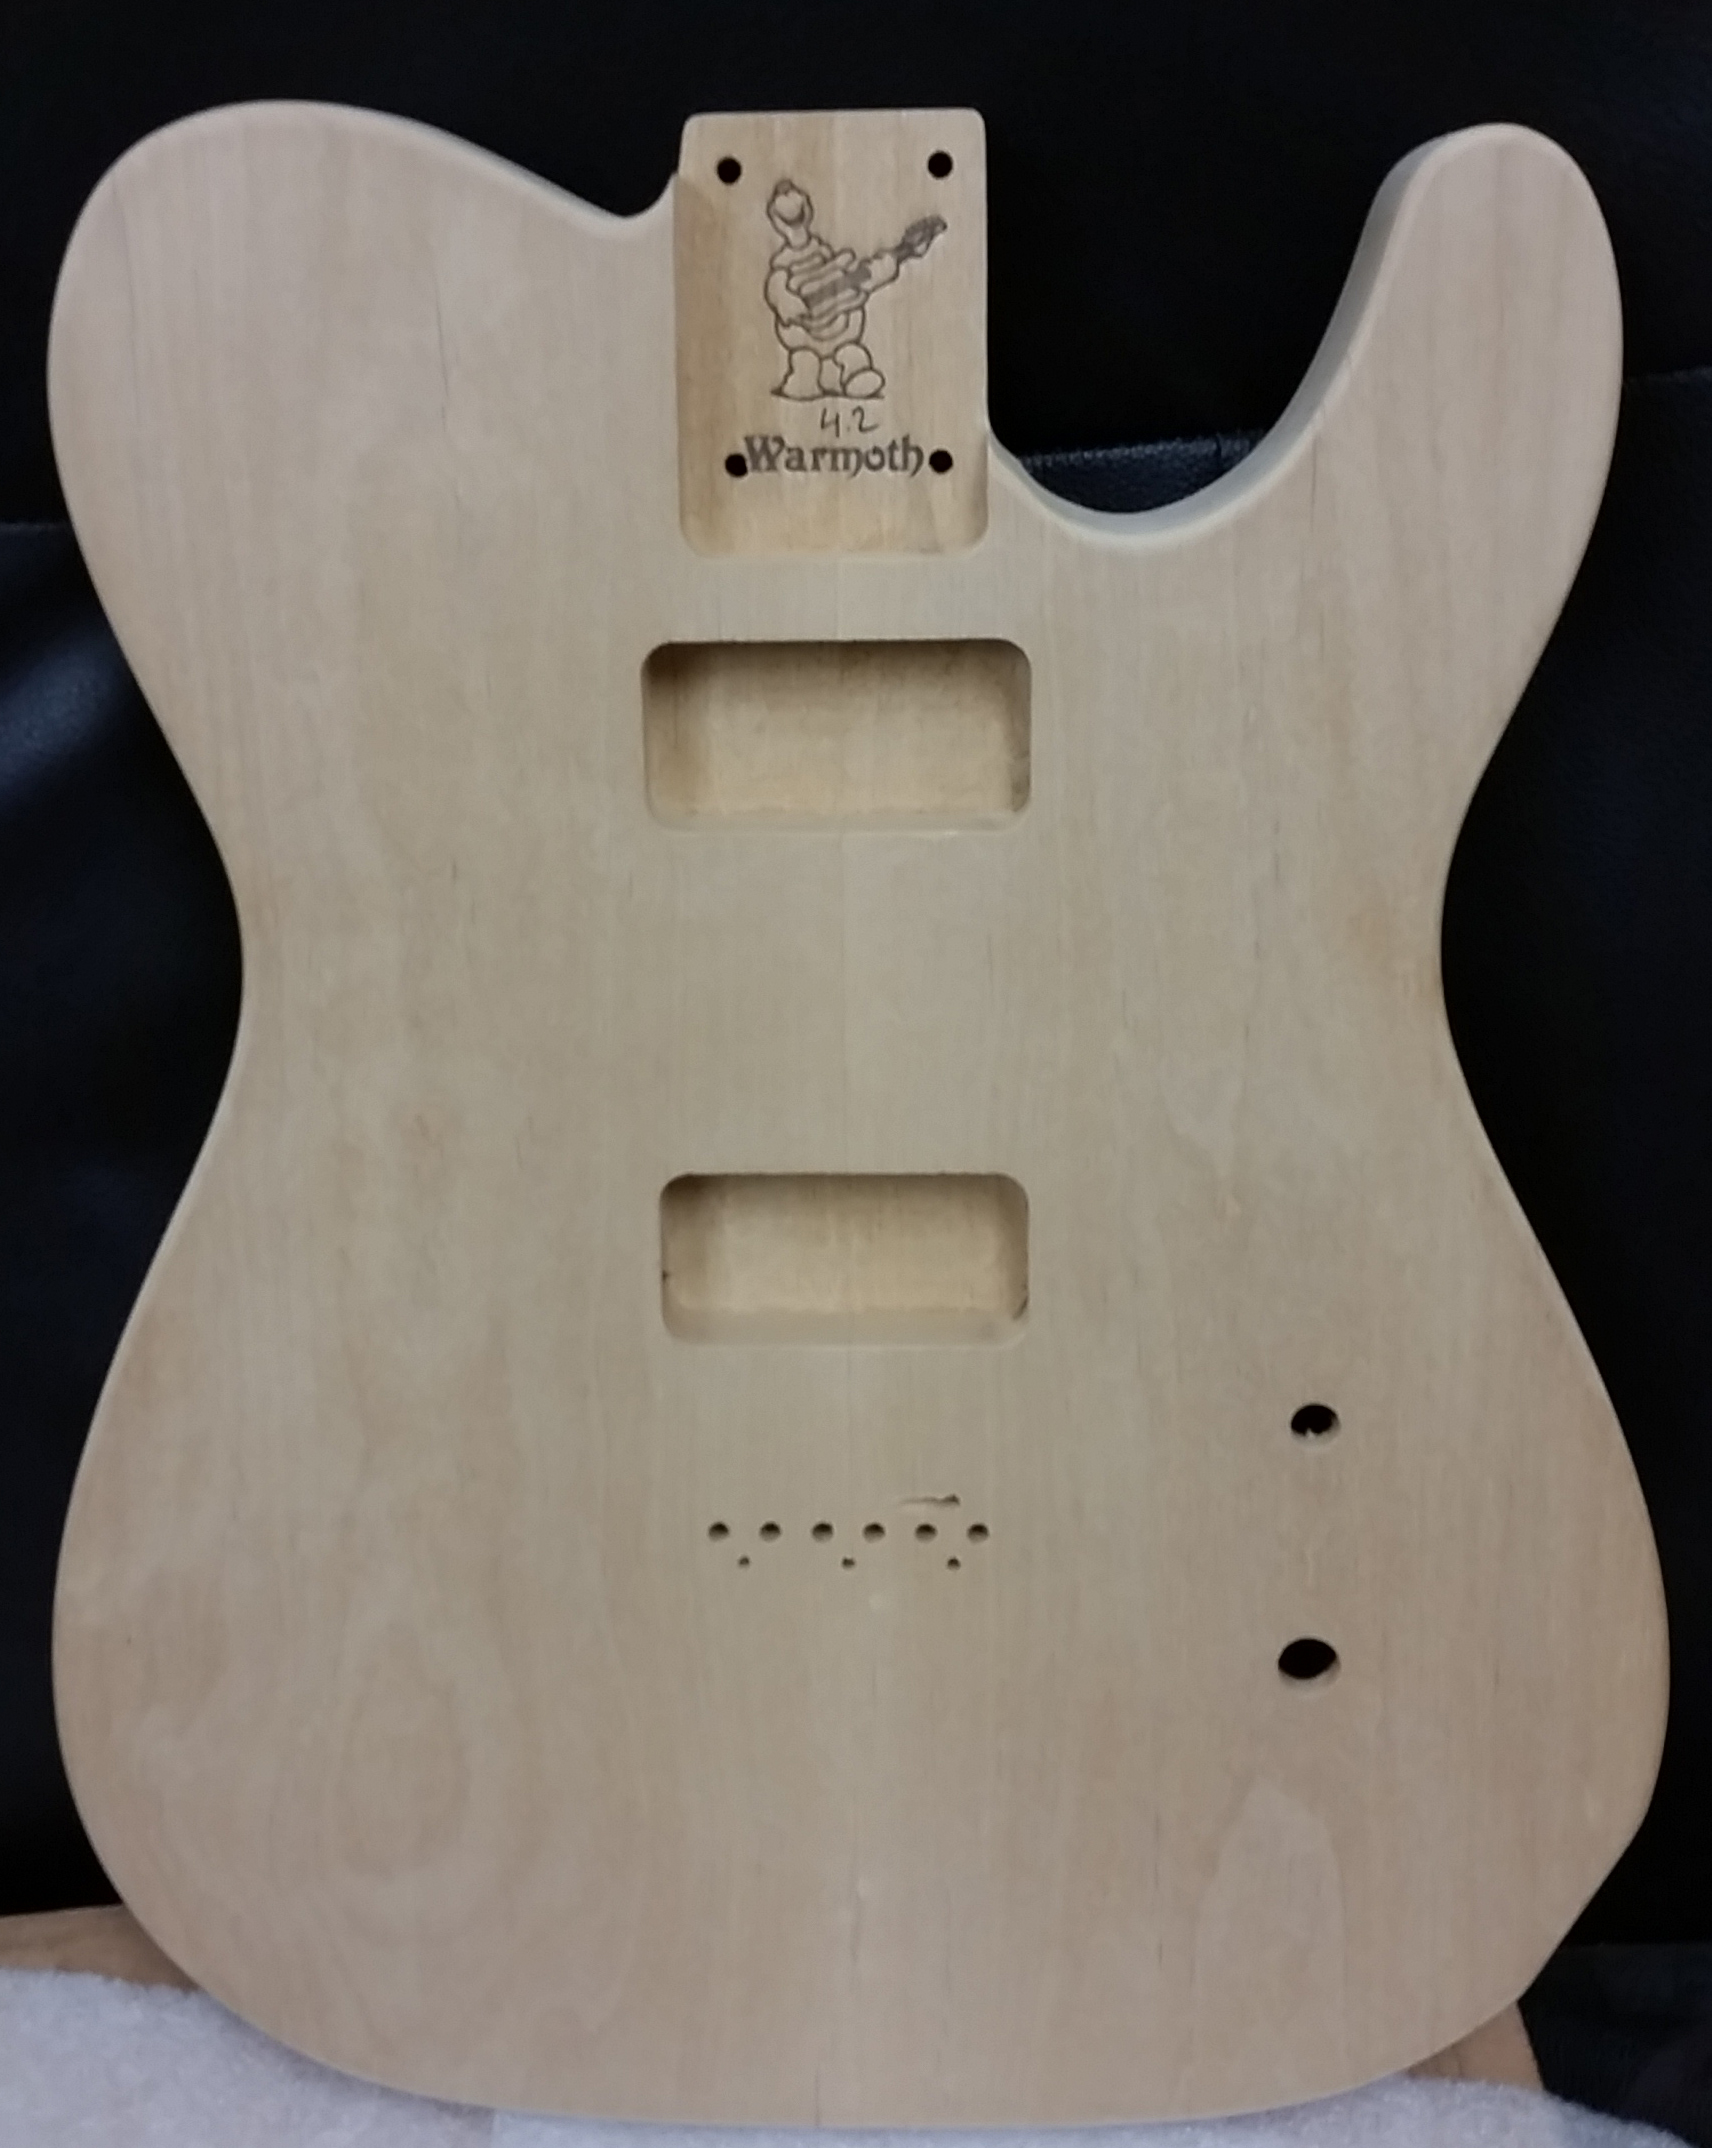 Fender Telecaster Cabronita body by Warmoth, view of front, 50 hours exposure, dry